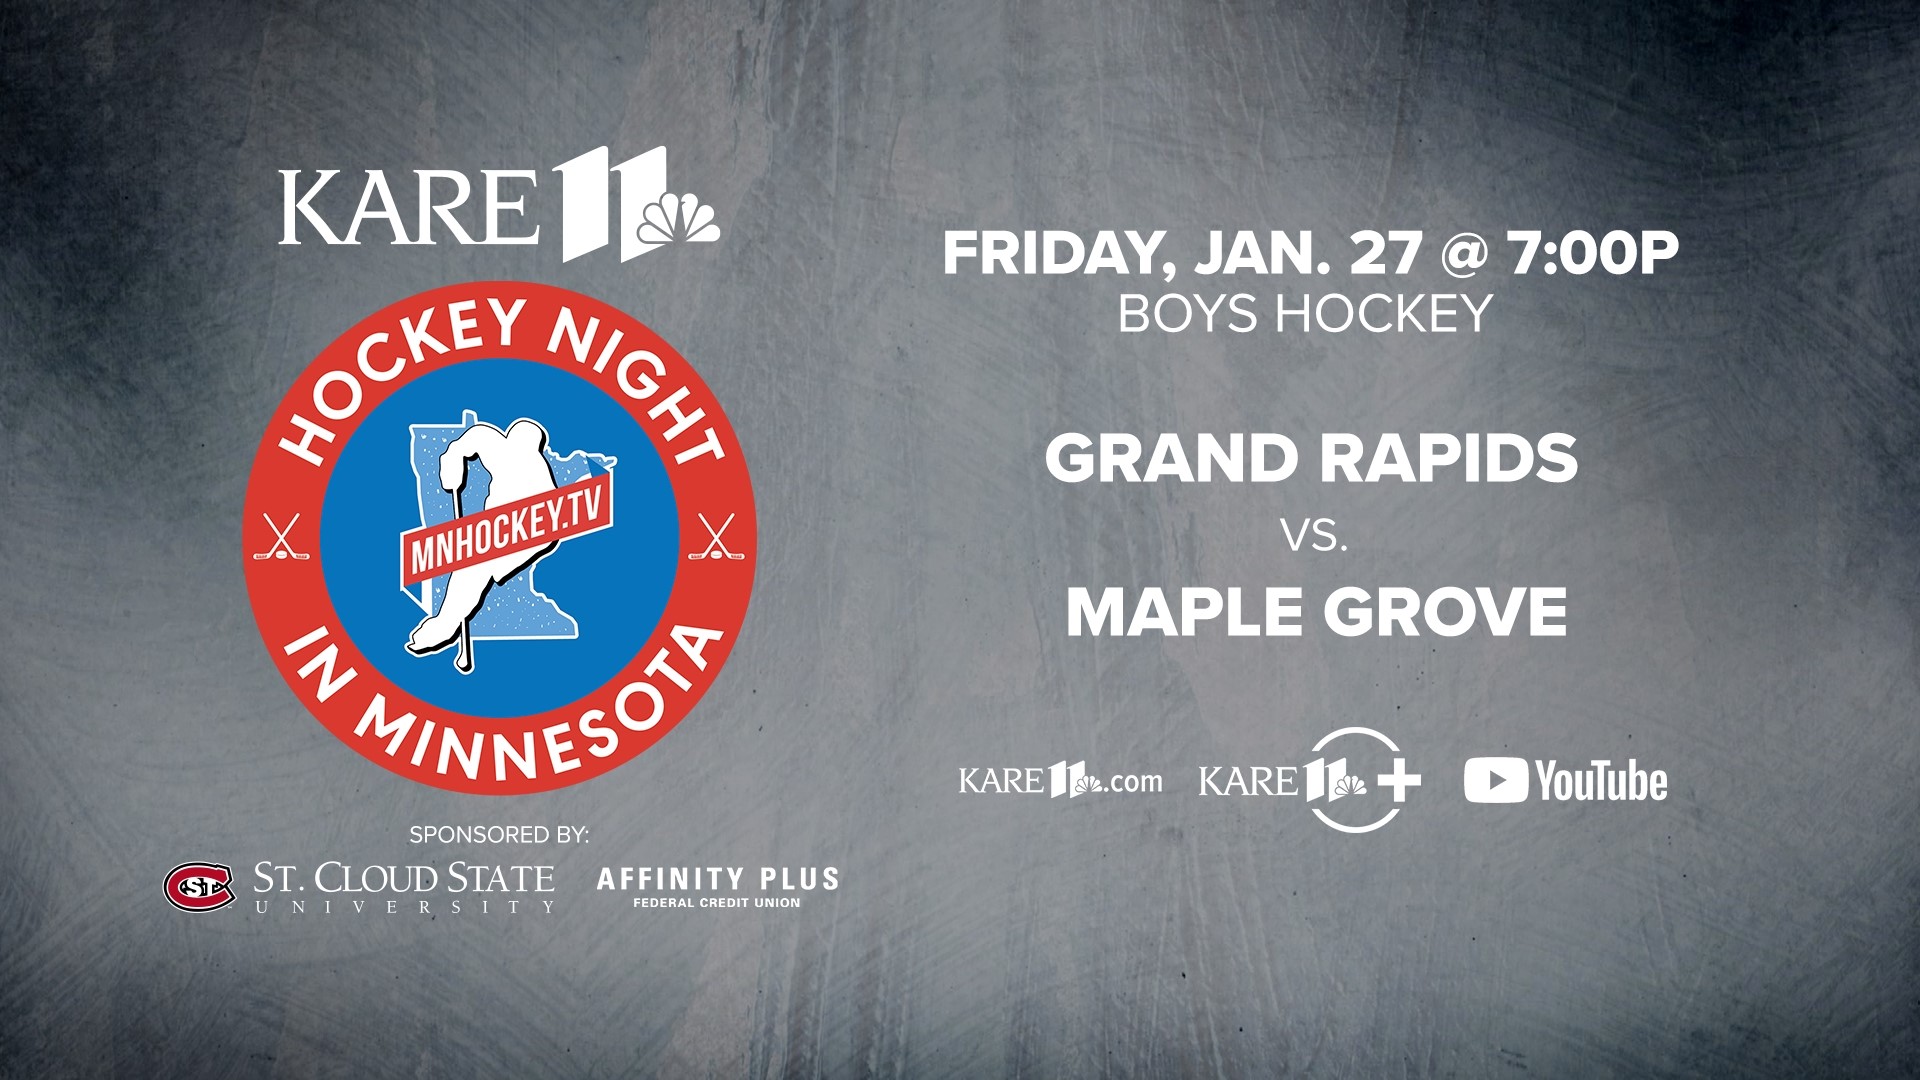 Grand Rapids faces off against Maple Grove in the live boys high school hockey stream Friday, Jan. 27.